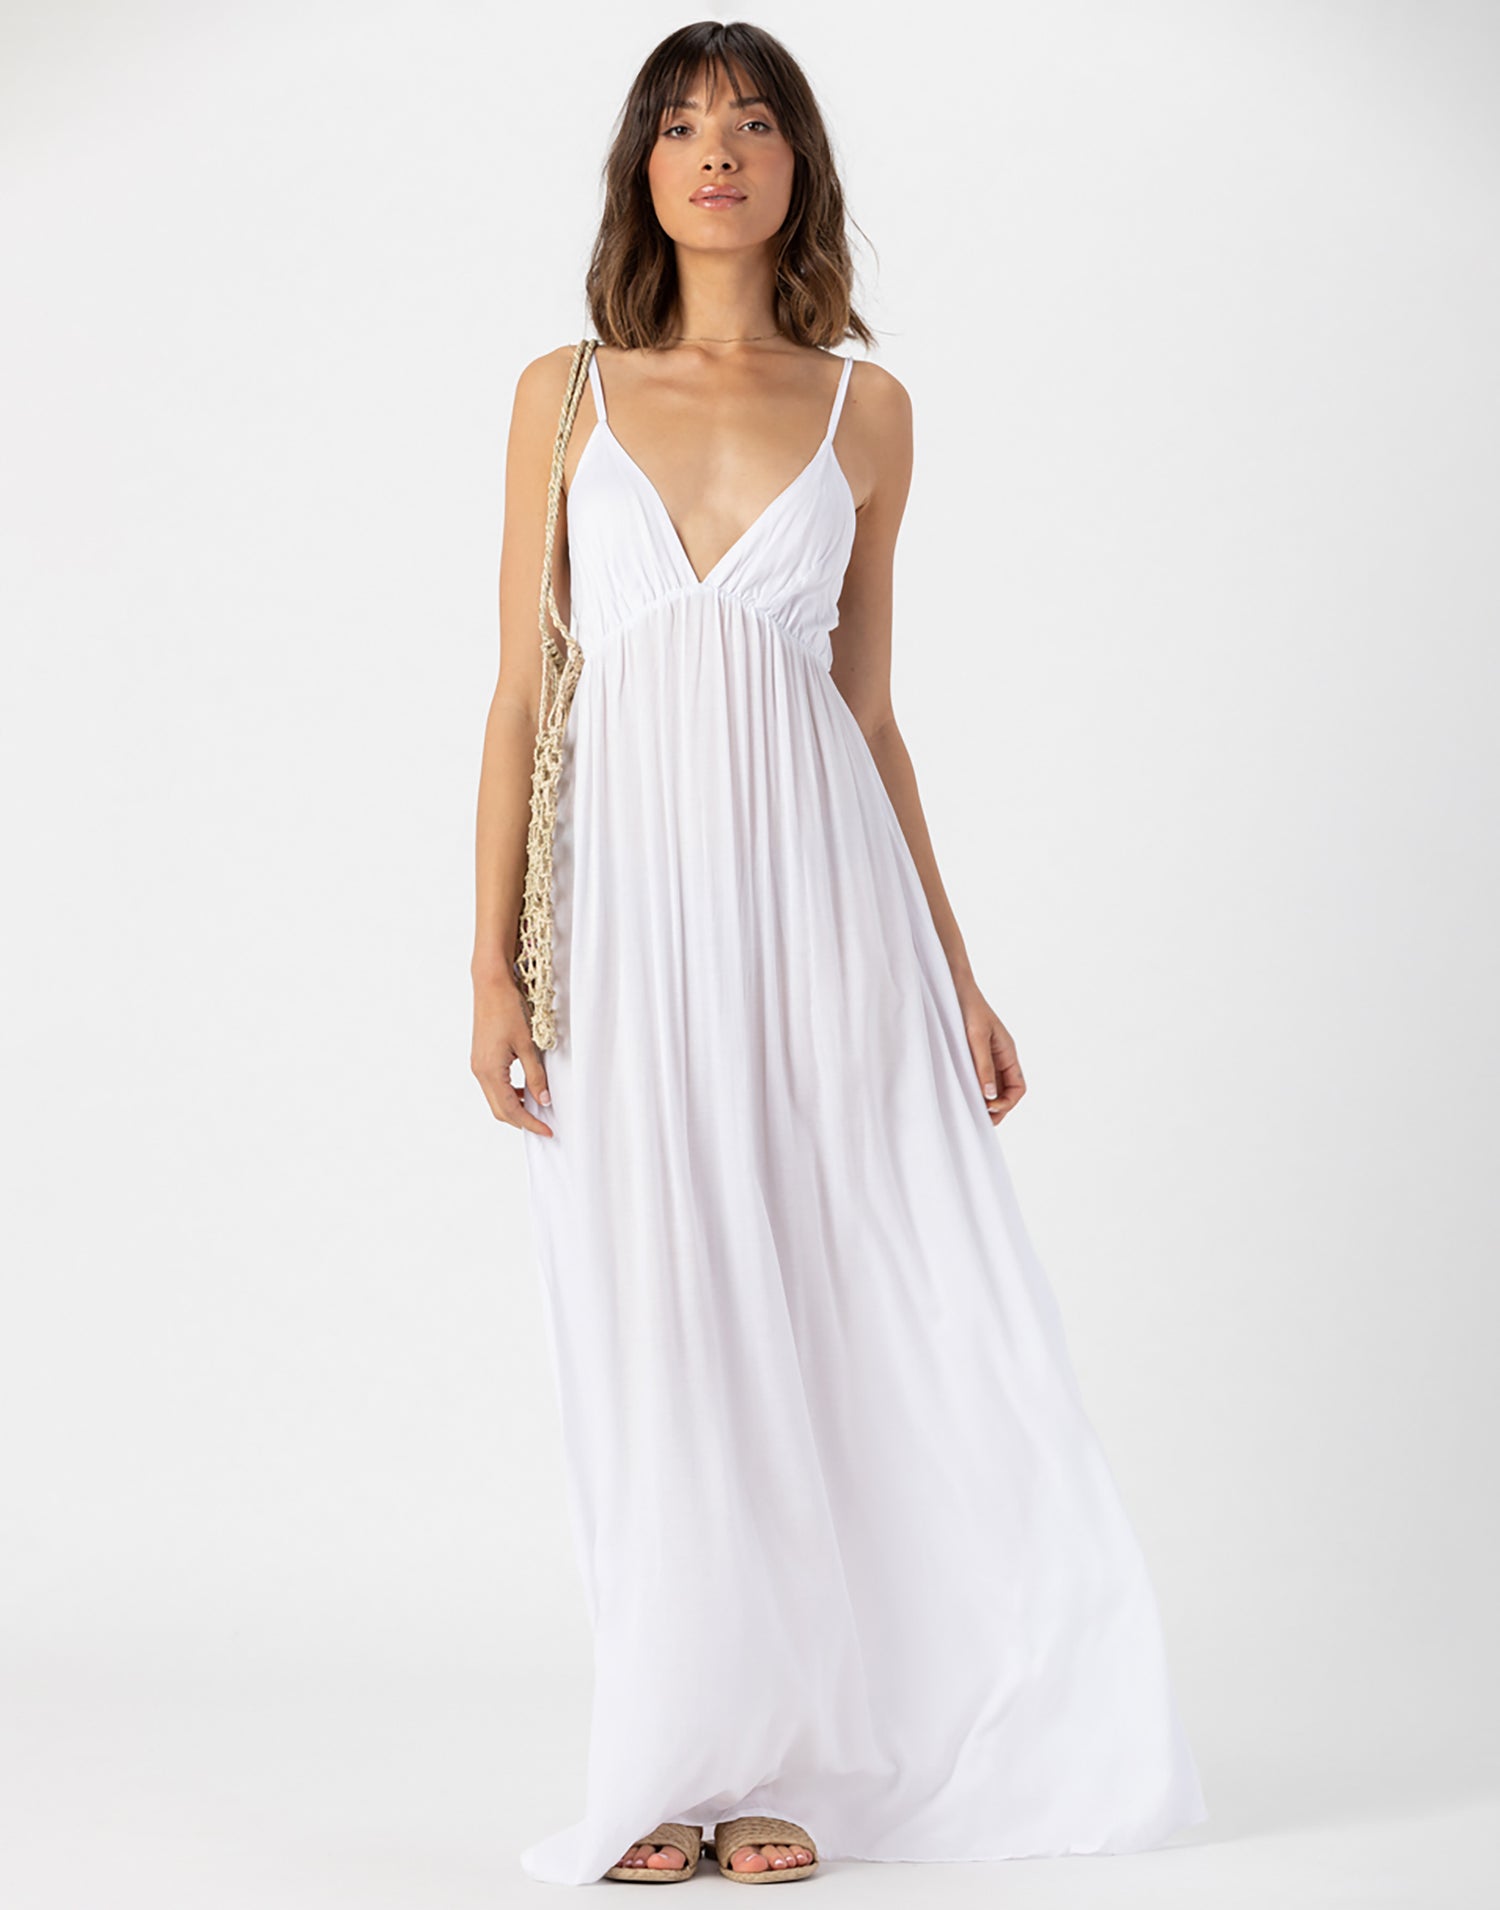 Gracie Maxi Dress by Tiare Hawaii in White - Front View